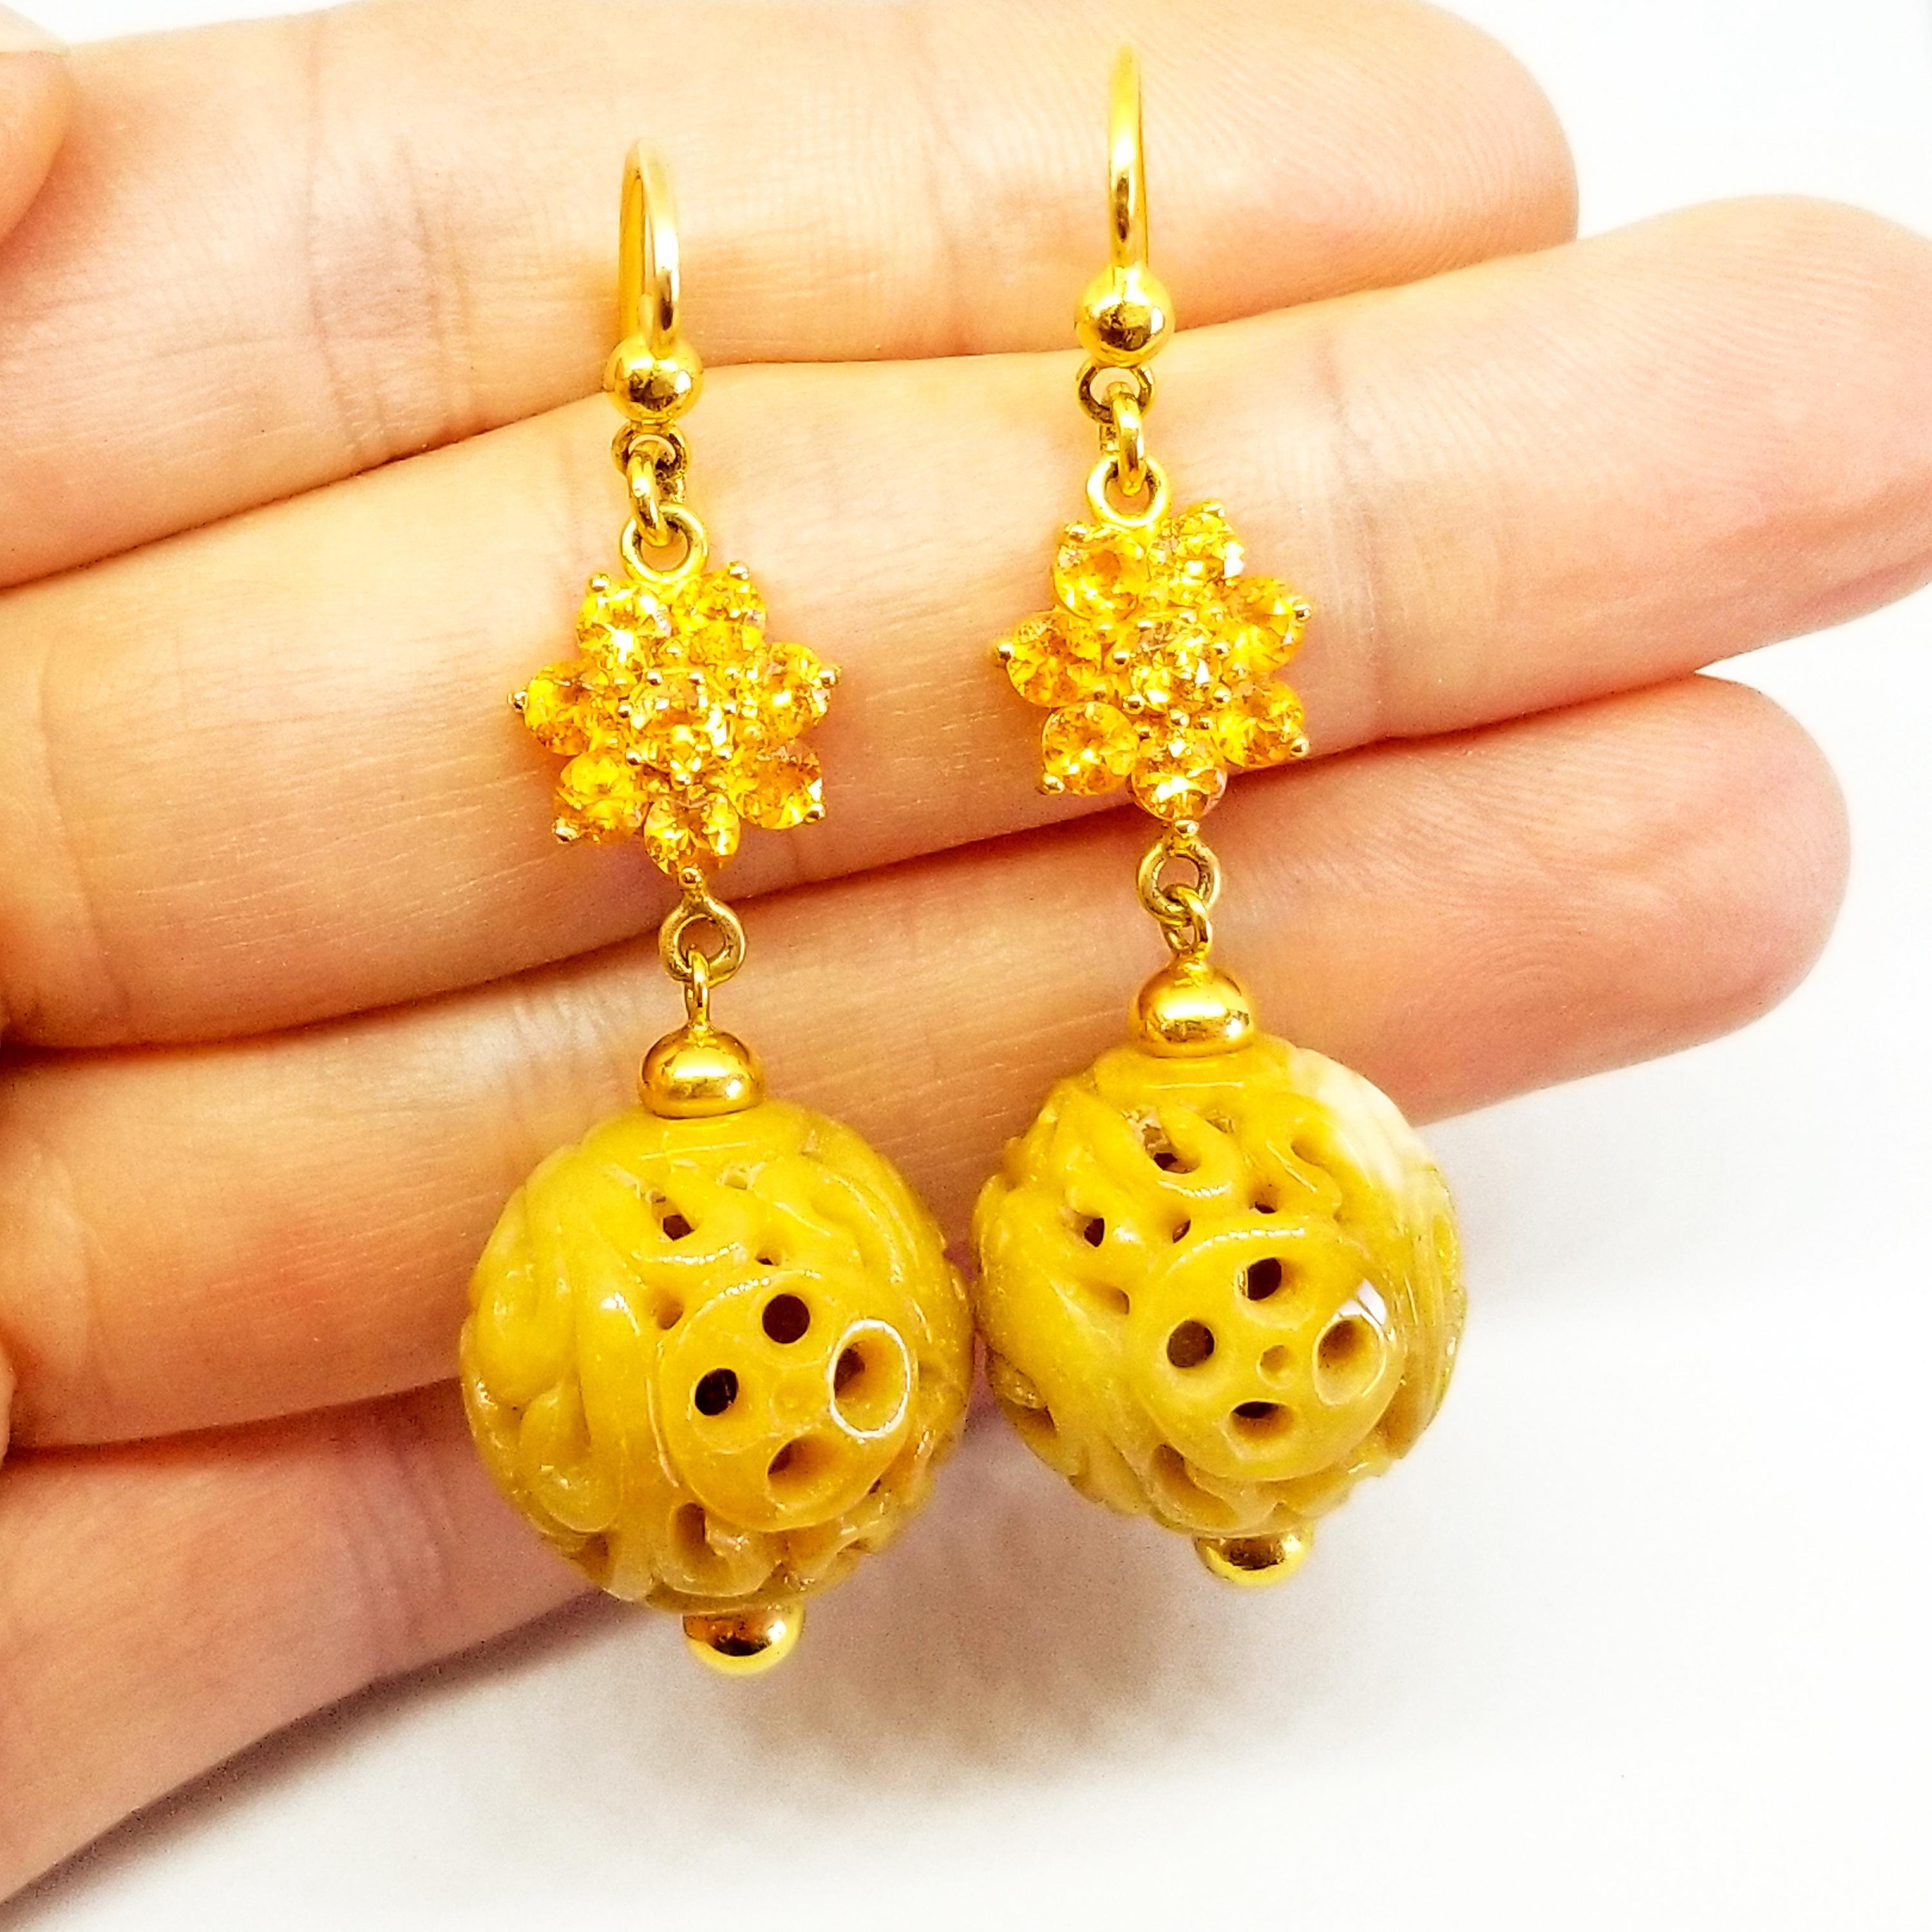 These Long and Elegant Earrings are One of a Kind in 14K Yellow Gold feature Floret Clusters of Round Brilliant Cut Sapphires of Deep Orange Yellow Hue and Gem Quality. The prong set Sapphires measure 3mm each and the fourteen stones combine for a